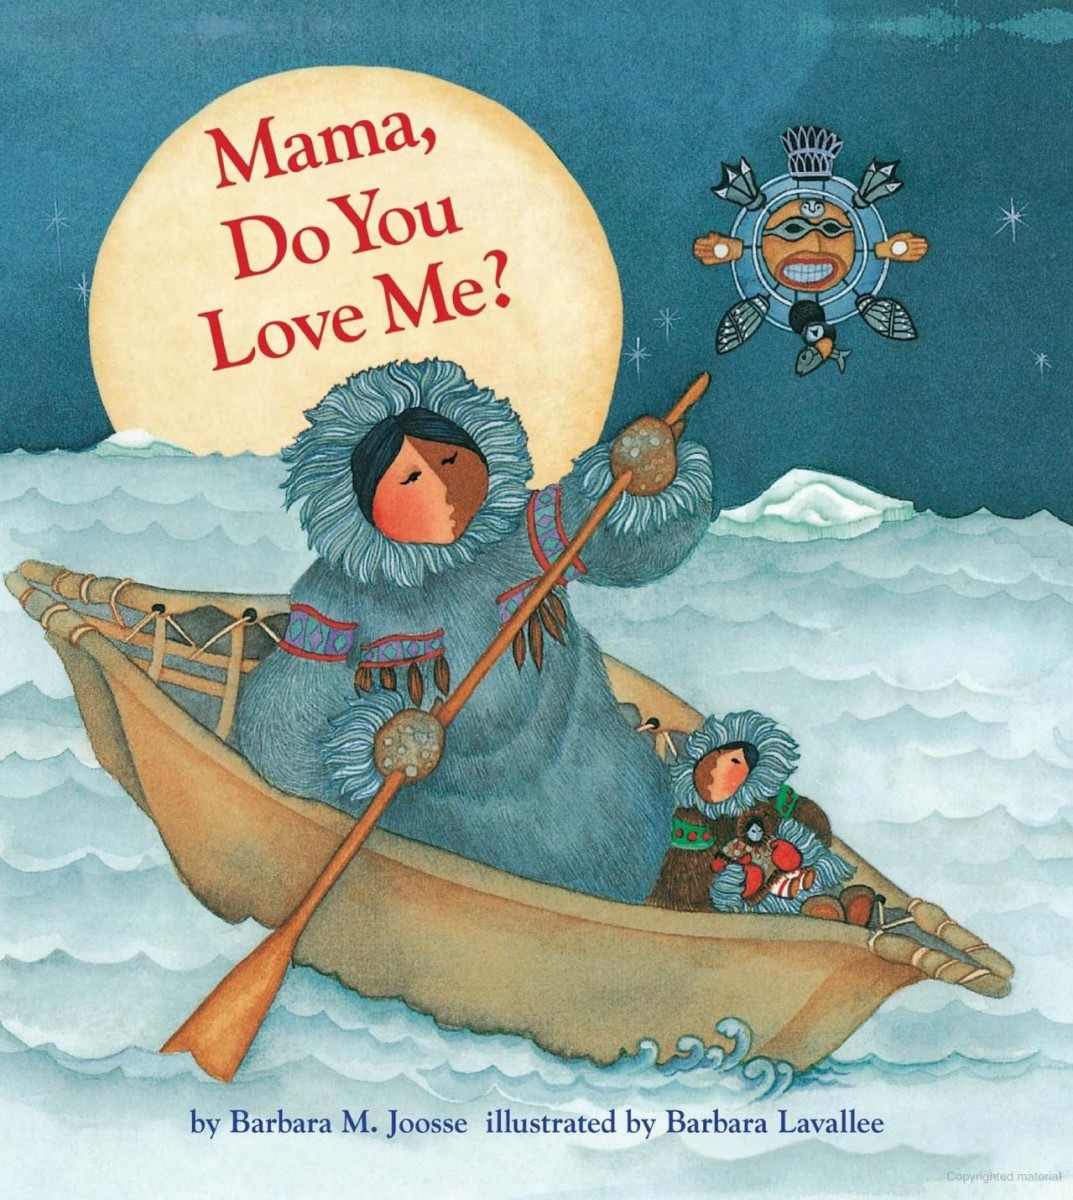 Mama, Do You Love Me? by Barbara M. Joose and Barbara M. Lavallee